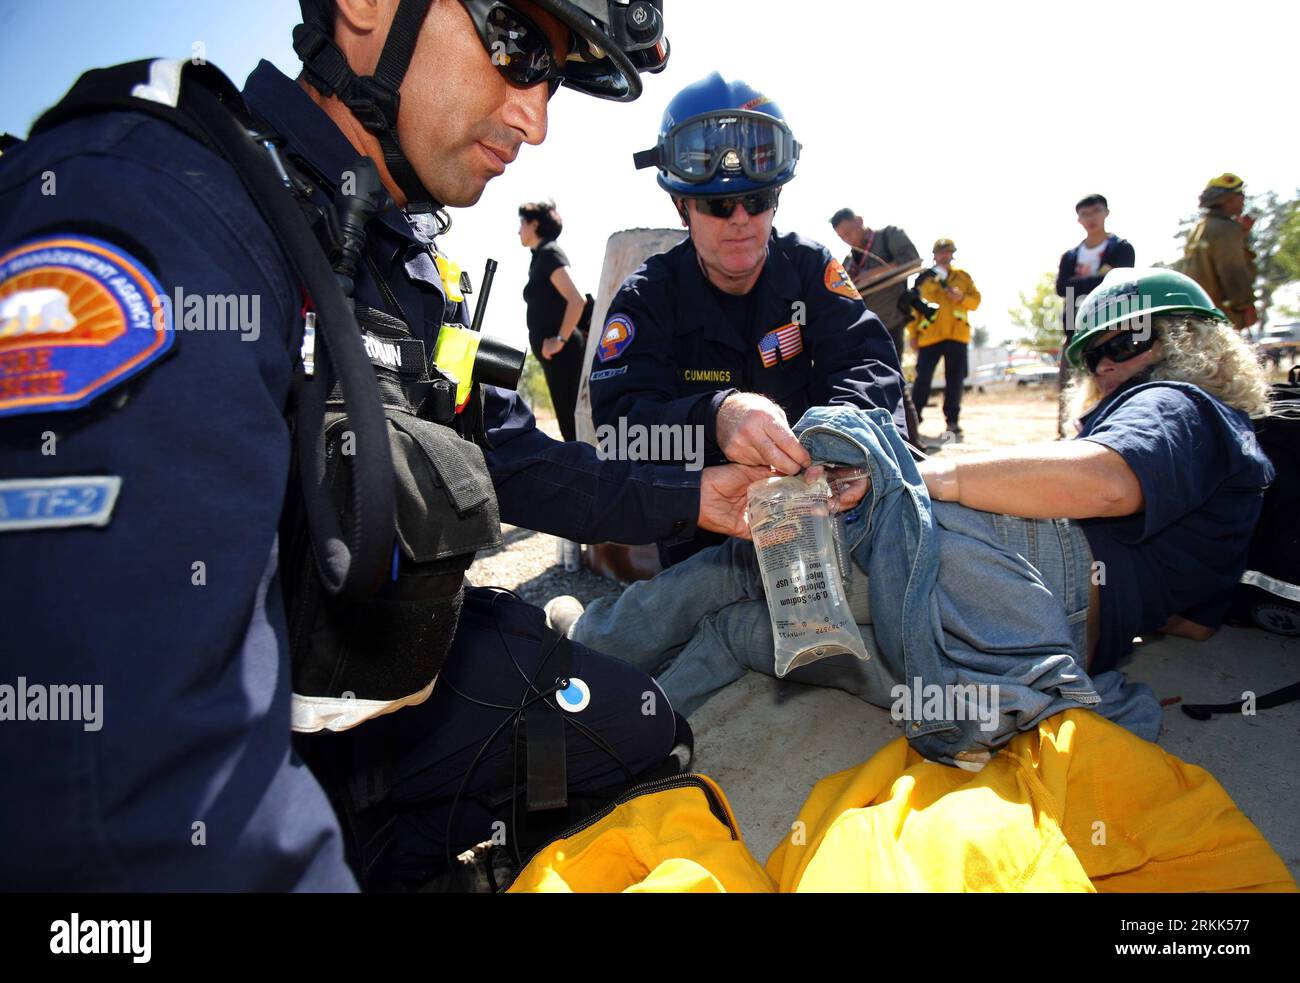 Bildnummer: 56201228  Datum: 20.10.2011  Copyright: imago/Xinhua (111021) -- LOS ANGELES, Oct. 21, 2011 (Xinhua) -- Members of the Los Angeles County Fire Department give first aid to a trapped survivor during a simulation cases of earthquake emergency as part of an earthquake drill in Northridge, California, Oct. 20, 2011. According to the organizers, for the fourth year in a row, 8.2 million statewide registered to take part in the exercise, surpassing last year s record total 7.9 million participants. (Xinhua/Ringo H.W. Chiu) (dtf) US-LOS ANGELES-EARTHQUAKE DRILL PUBLICATIONxNOTxINxCHN Gese Stock Photo